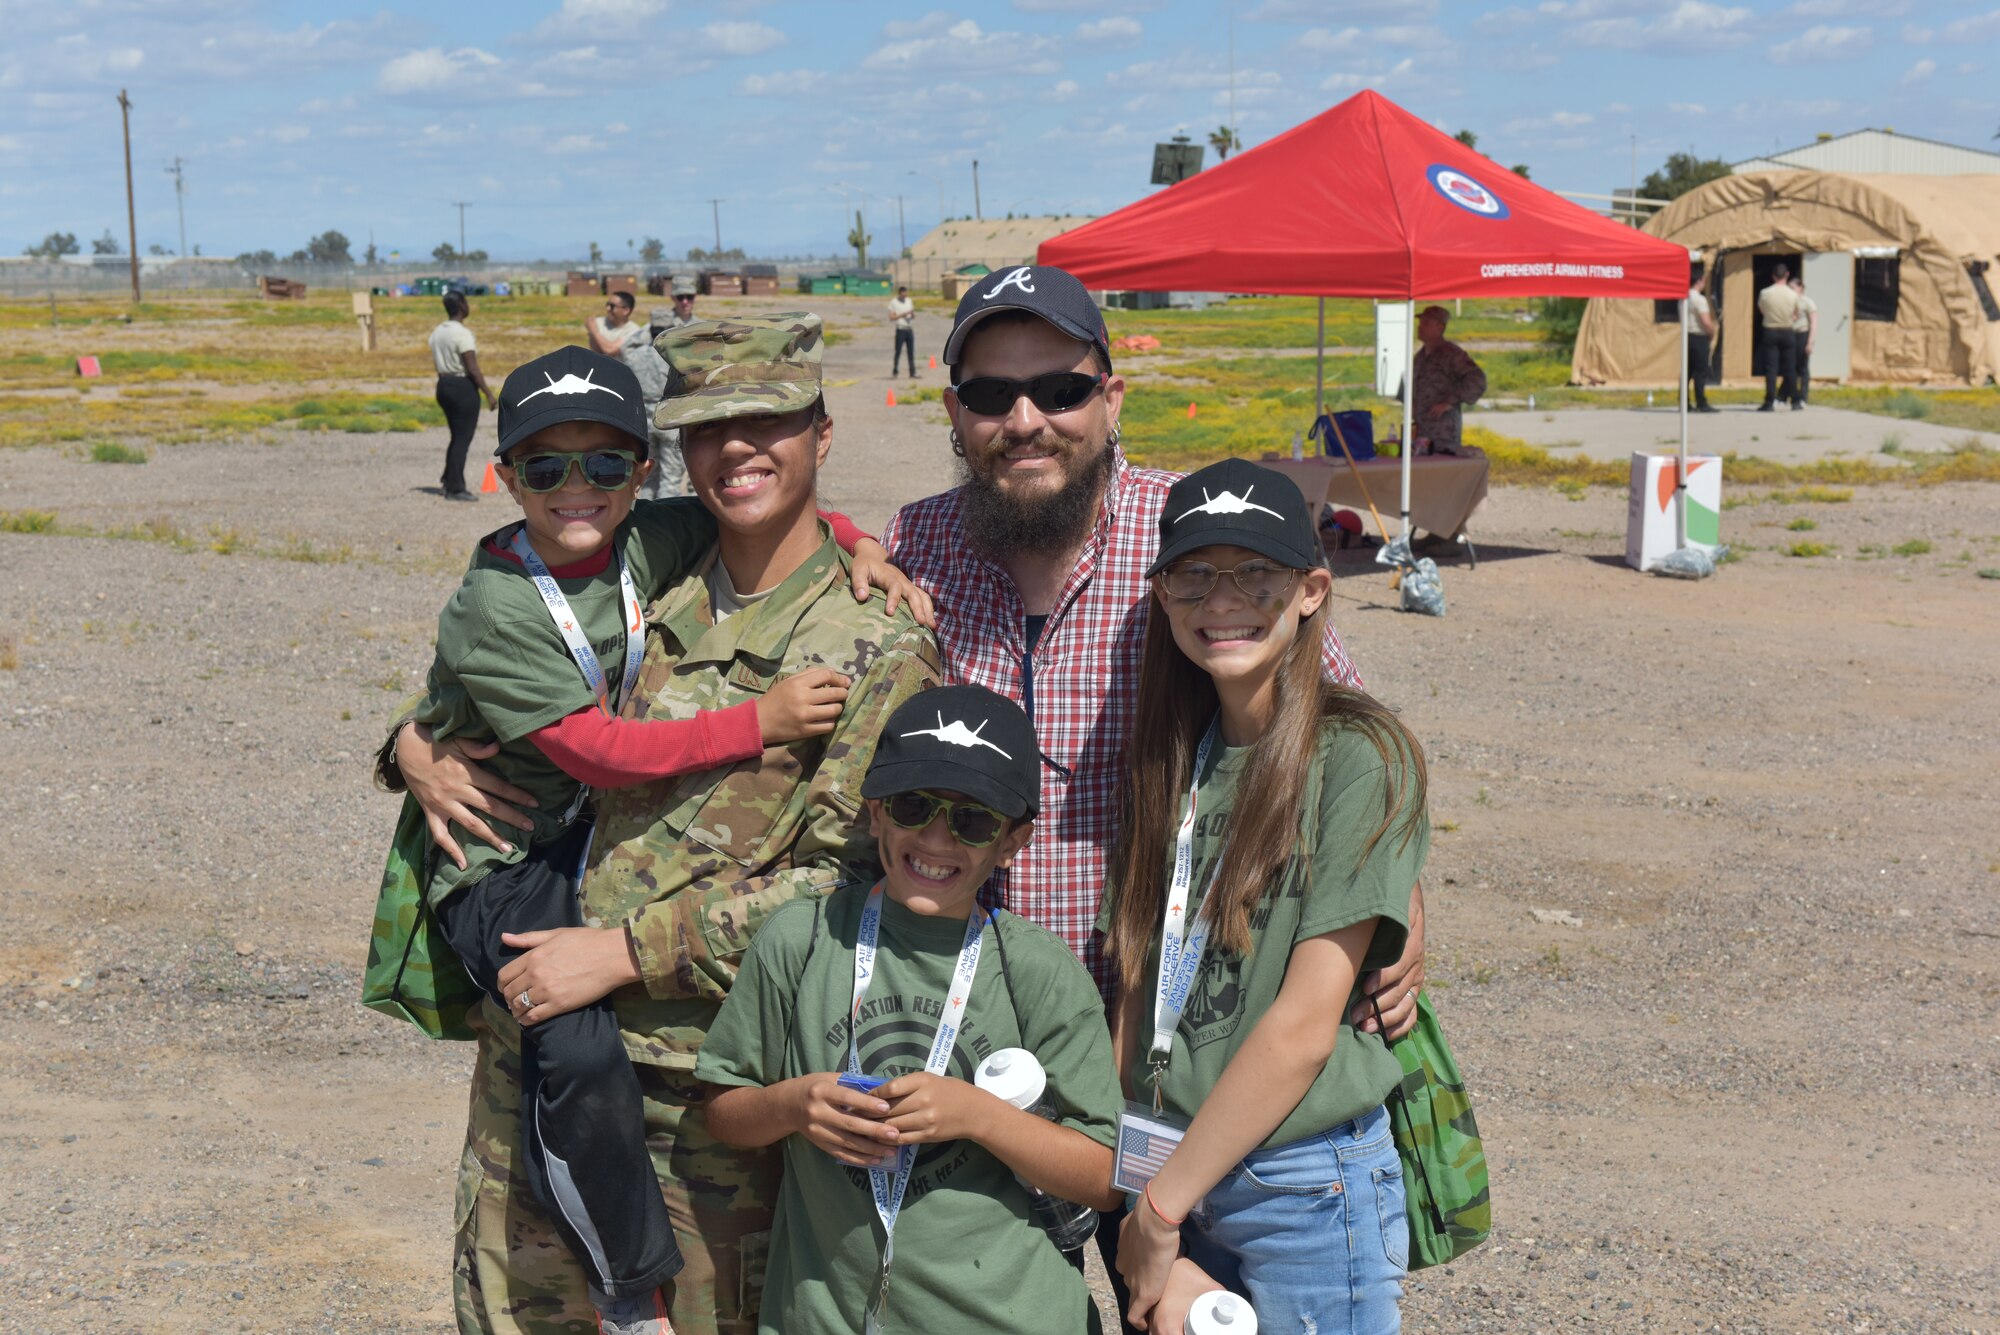 Operation Reserve Kids engages military families